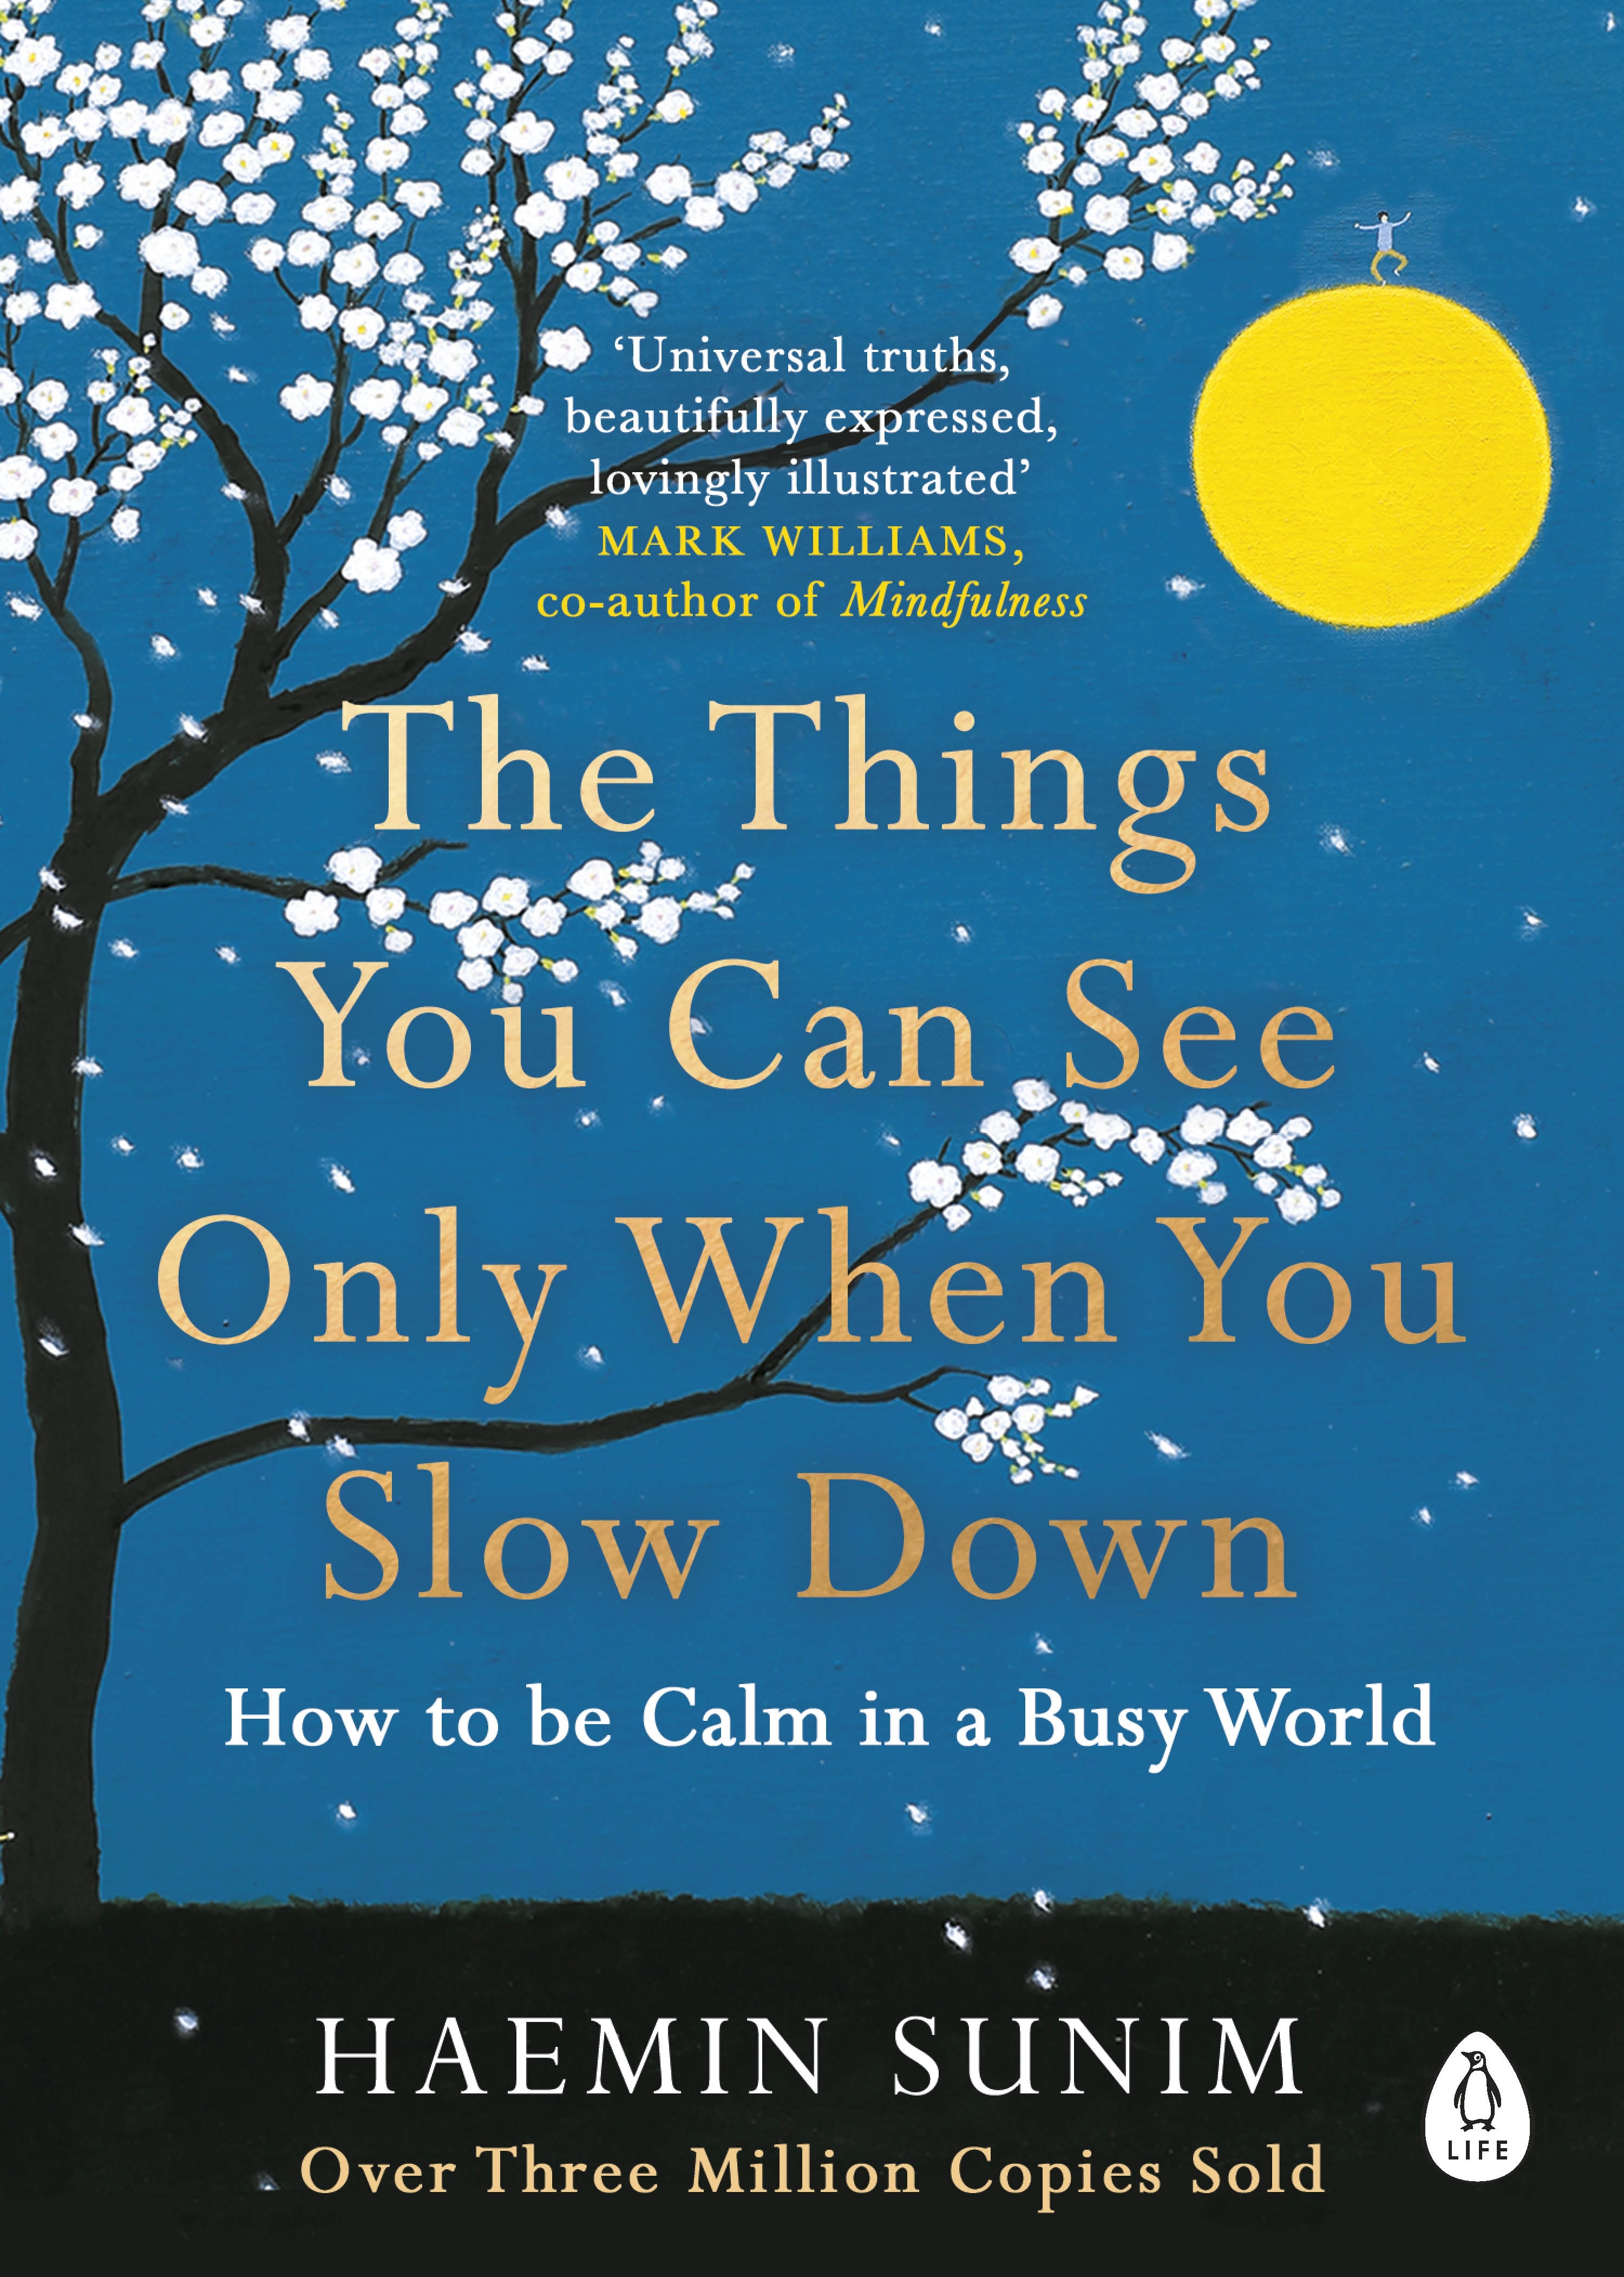 Book “The Things You Can See Only When You Slow Down” by Haemin Sunim — February 8, 2018